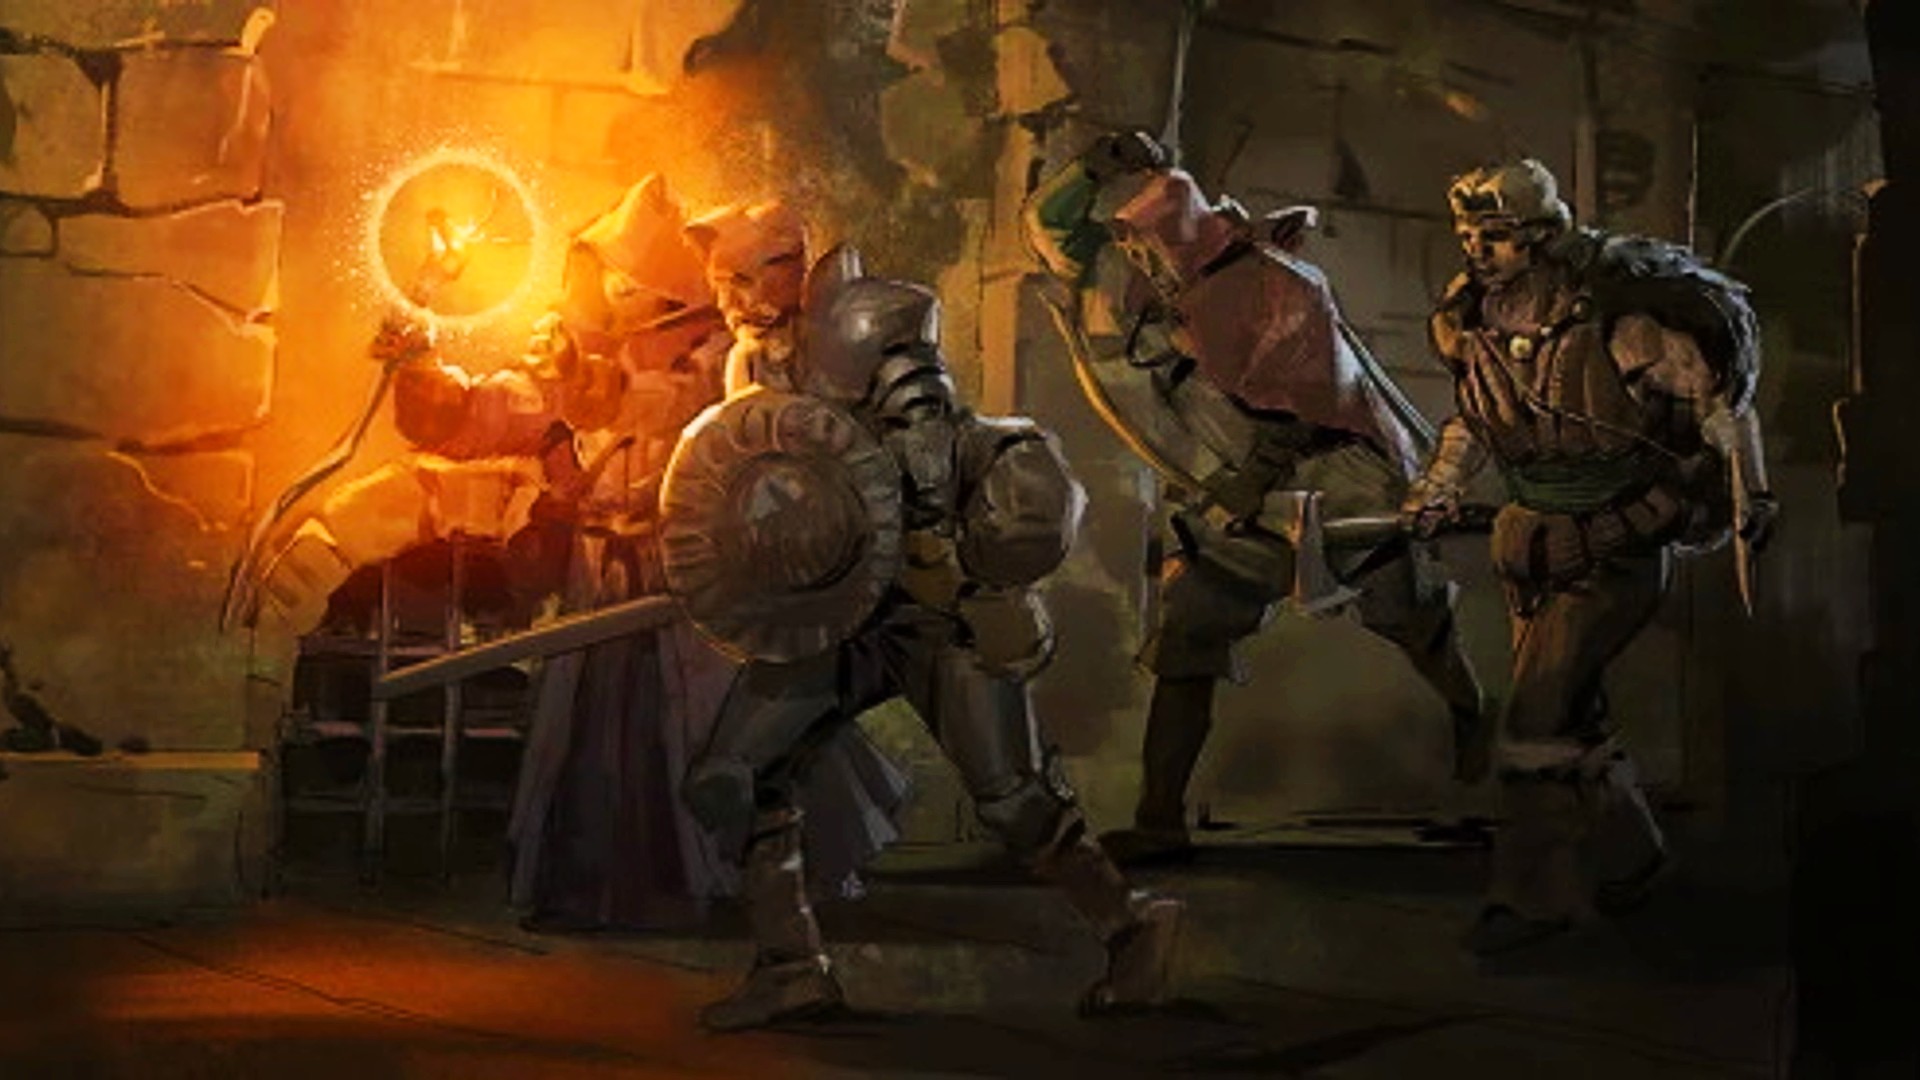 Four adventurers journey into a dim dungeon 